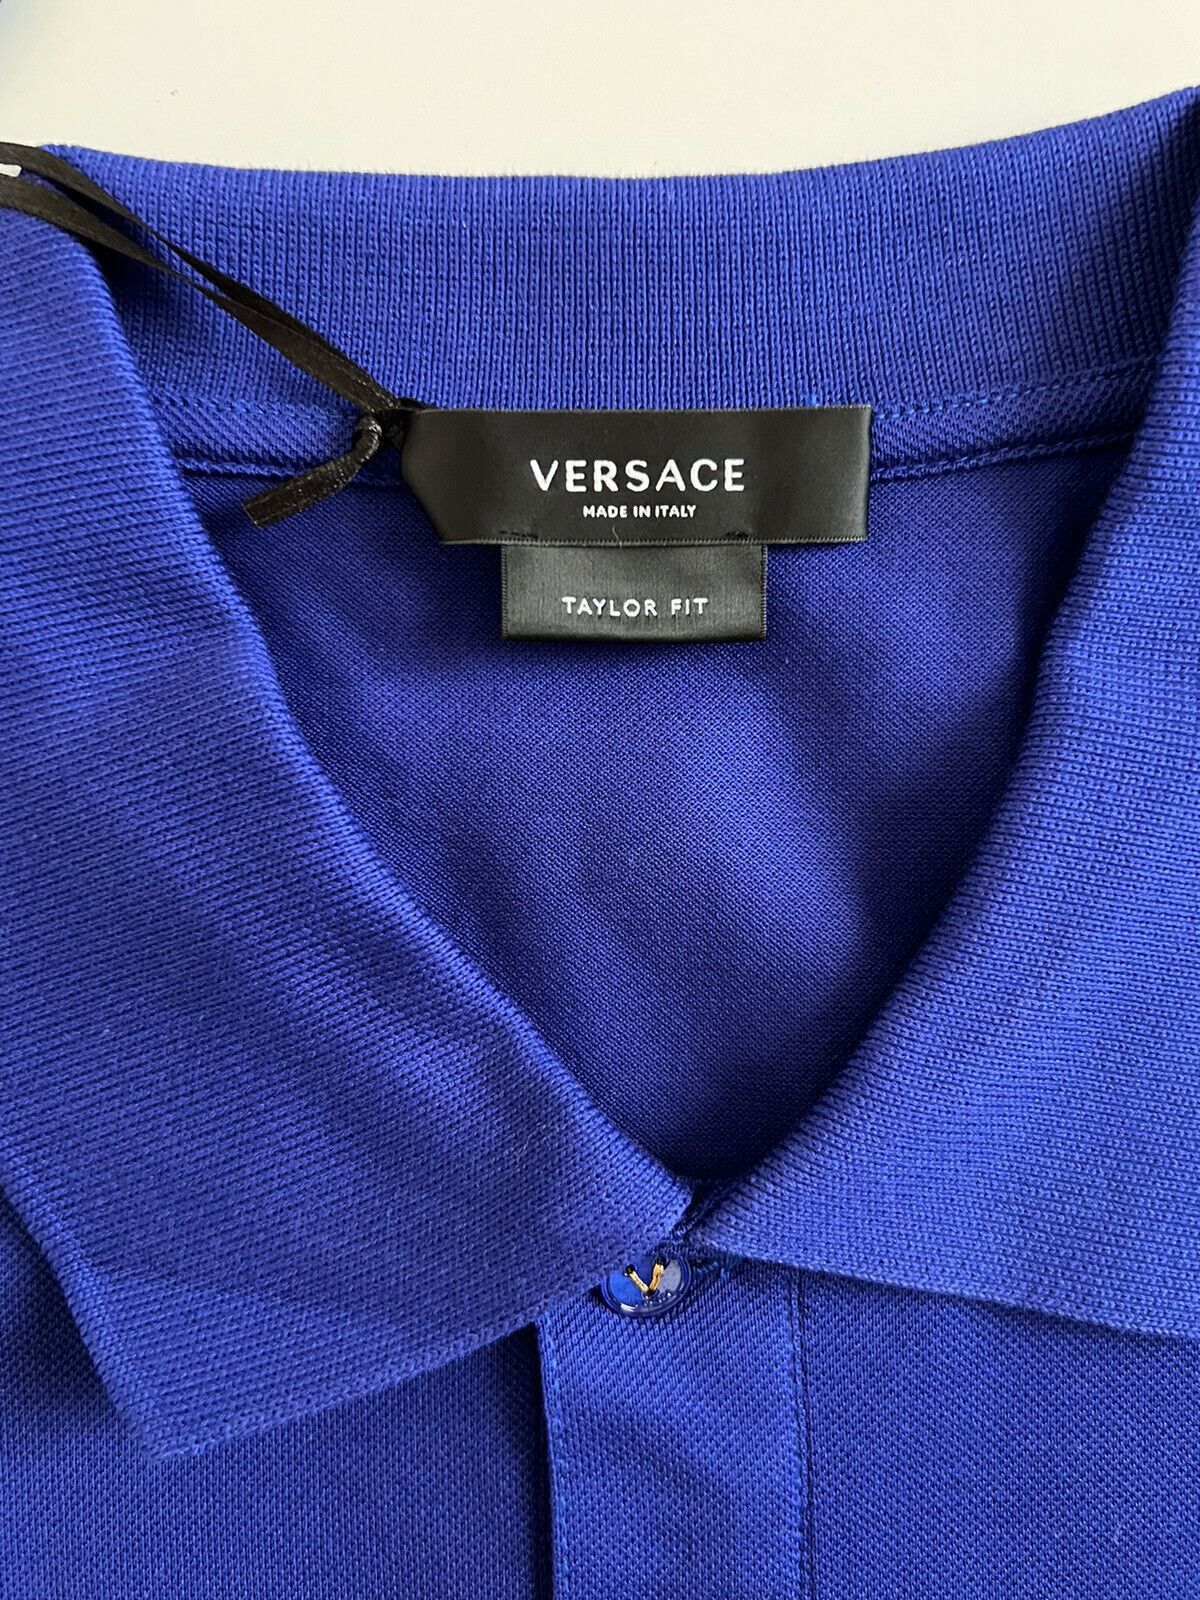 NWT $425 Versace Medusa Blue Tailor Fit Cotton Polo Shirt M A87427 Made in Italy